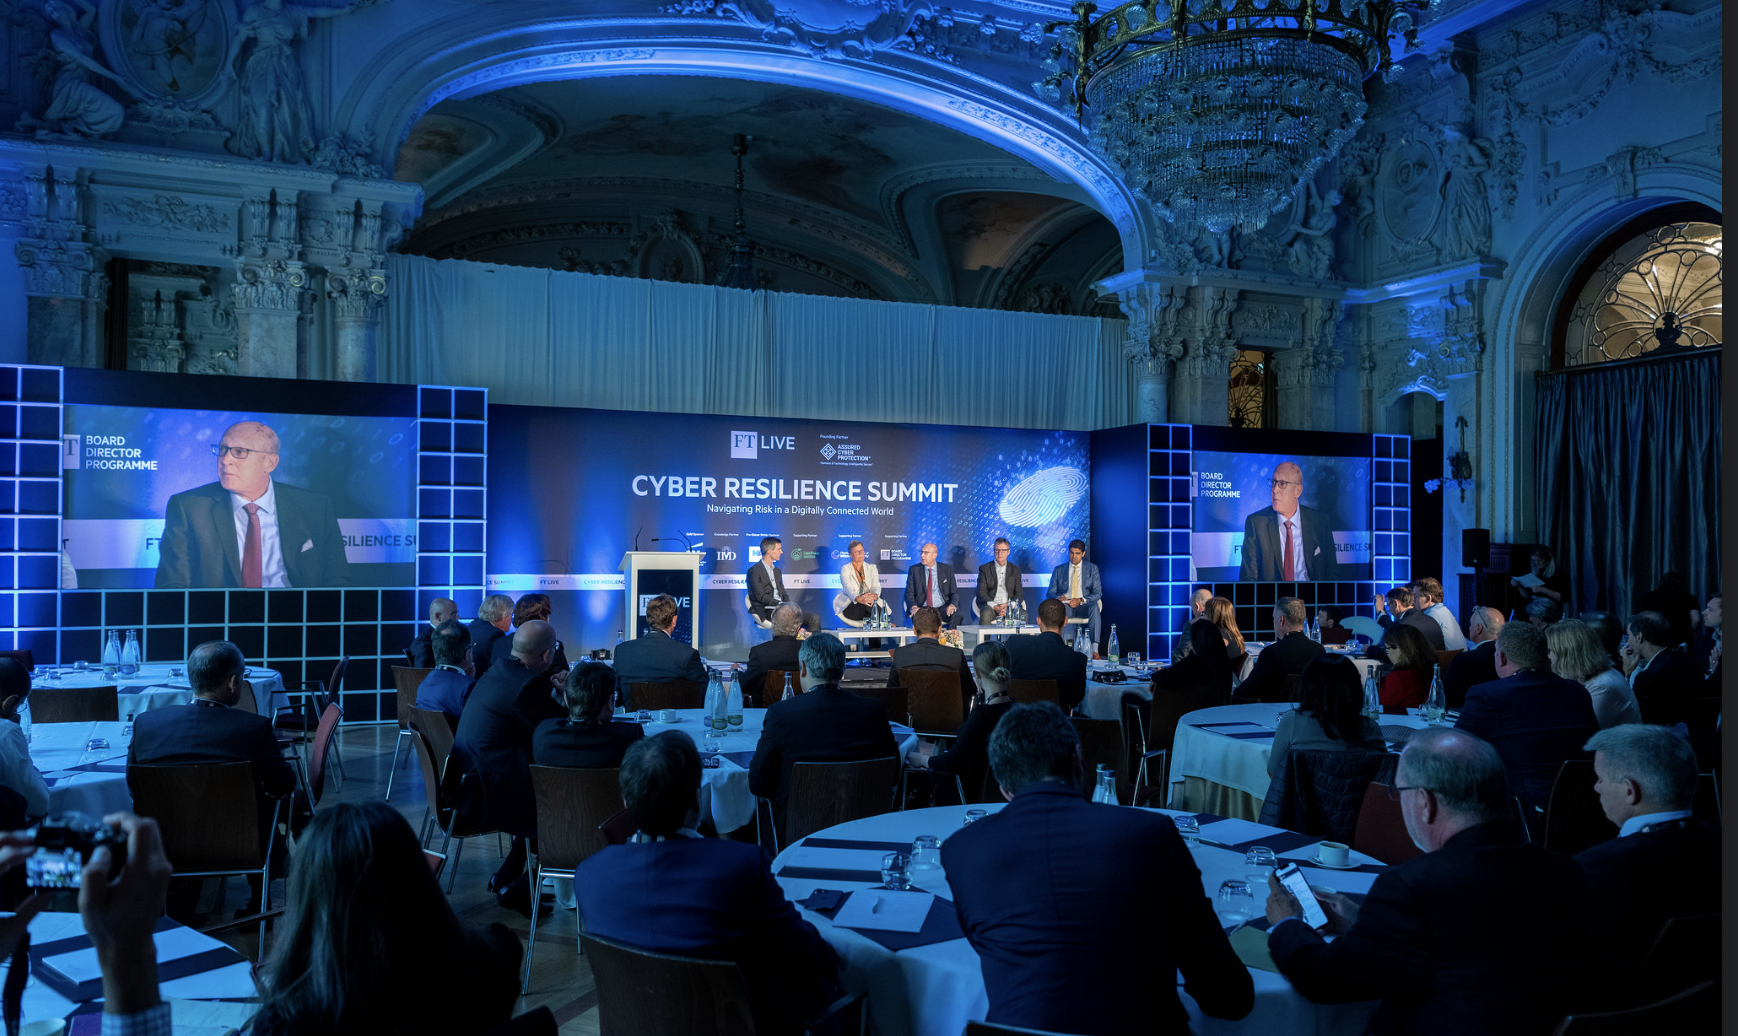 CYBER RESILIENCE SUMMIT: U.S. EDITION